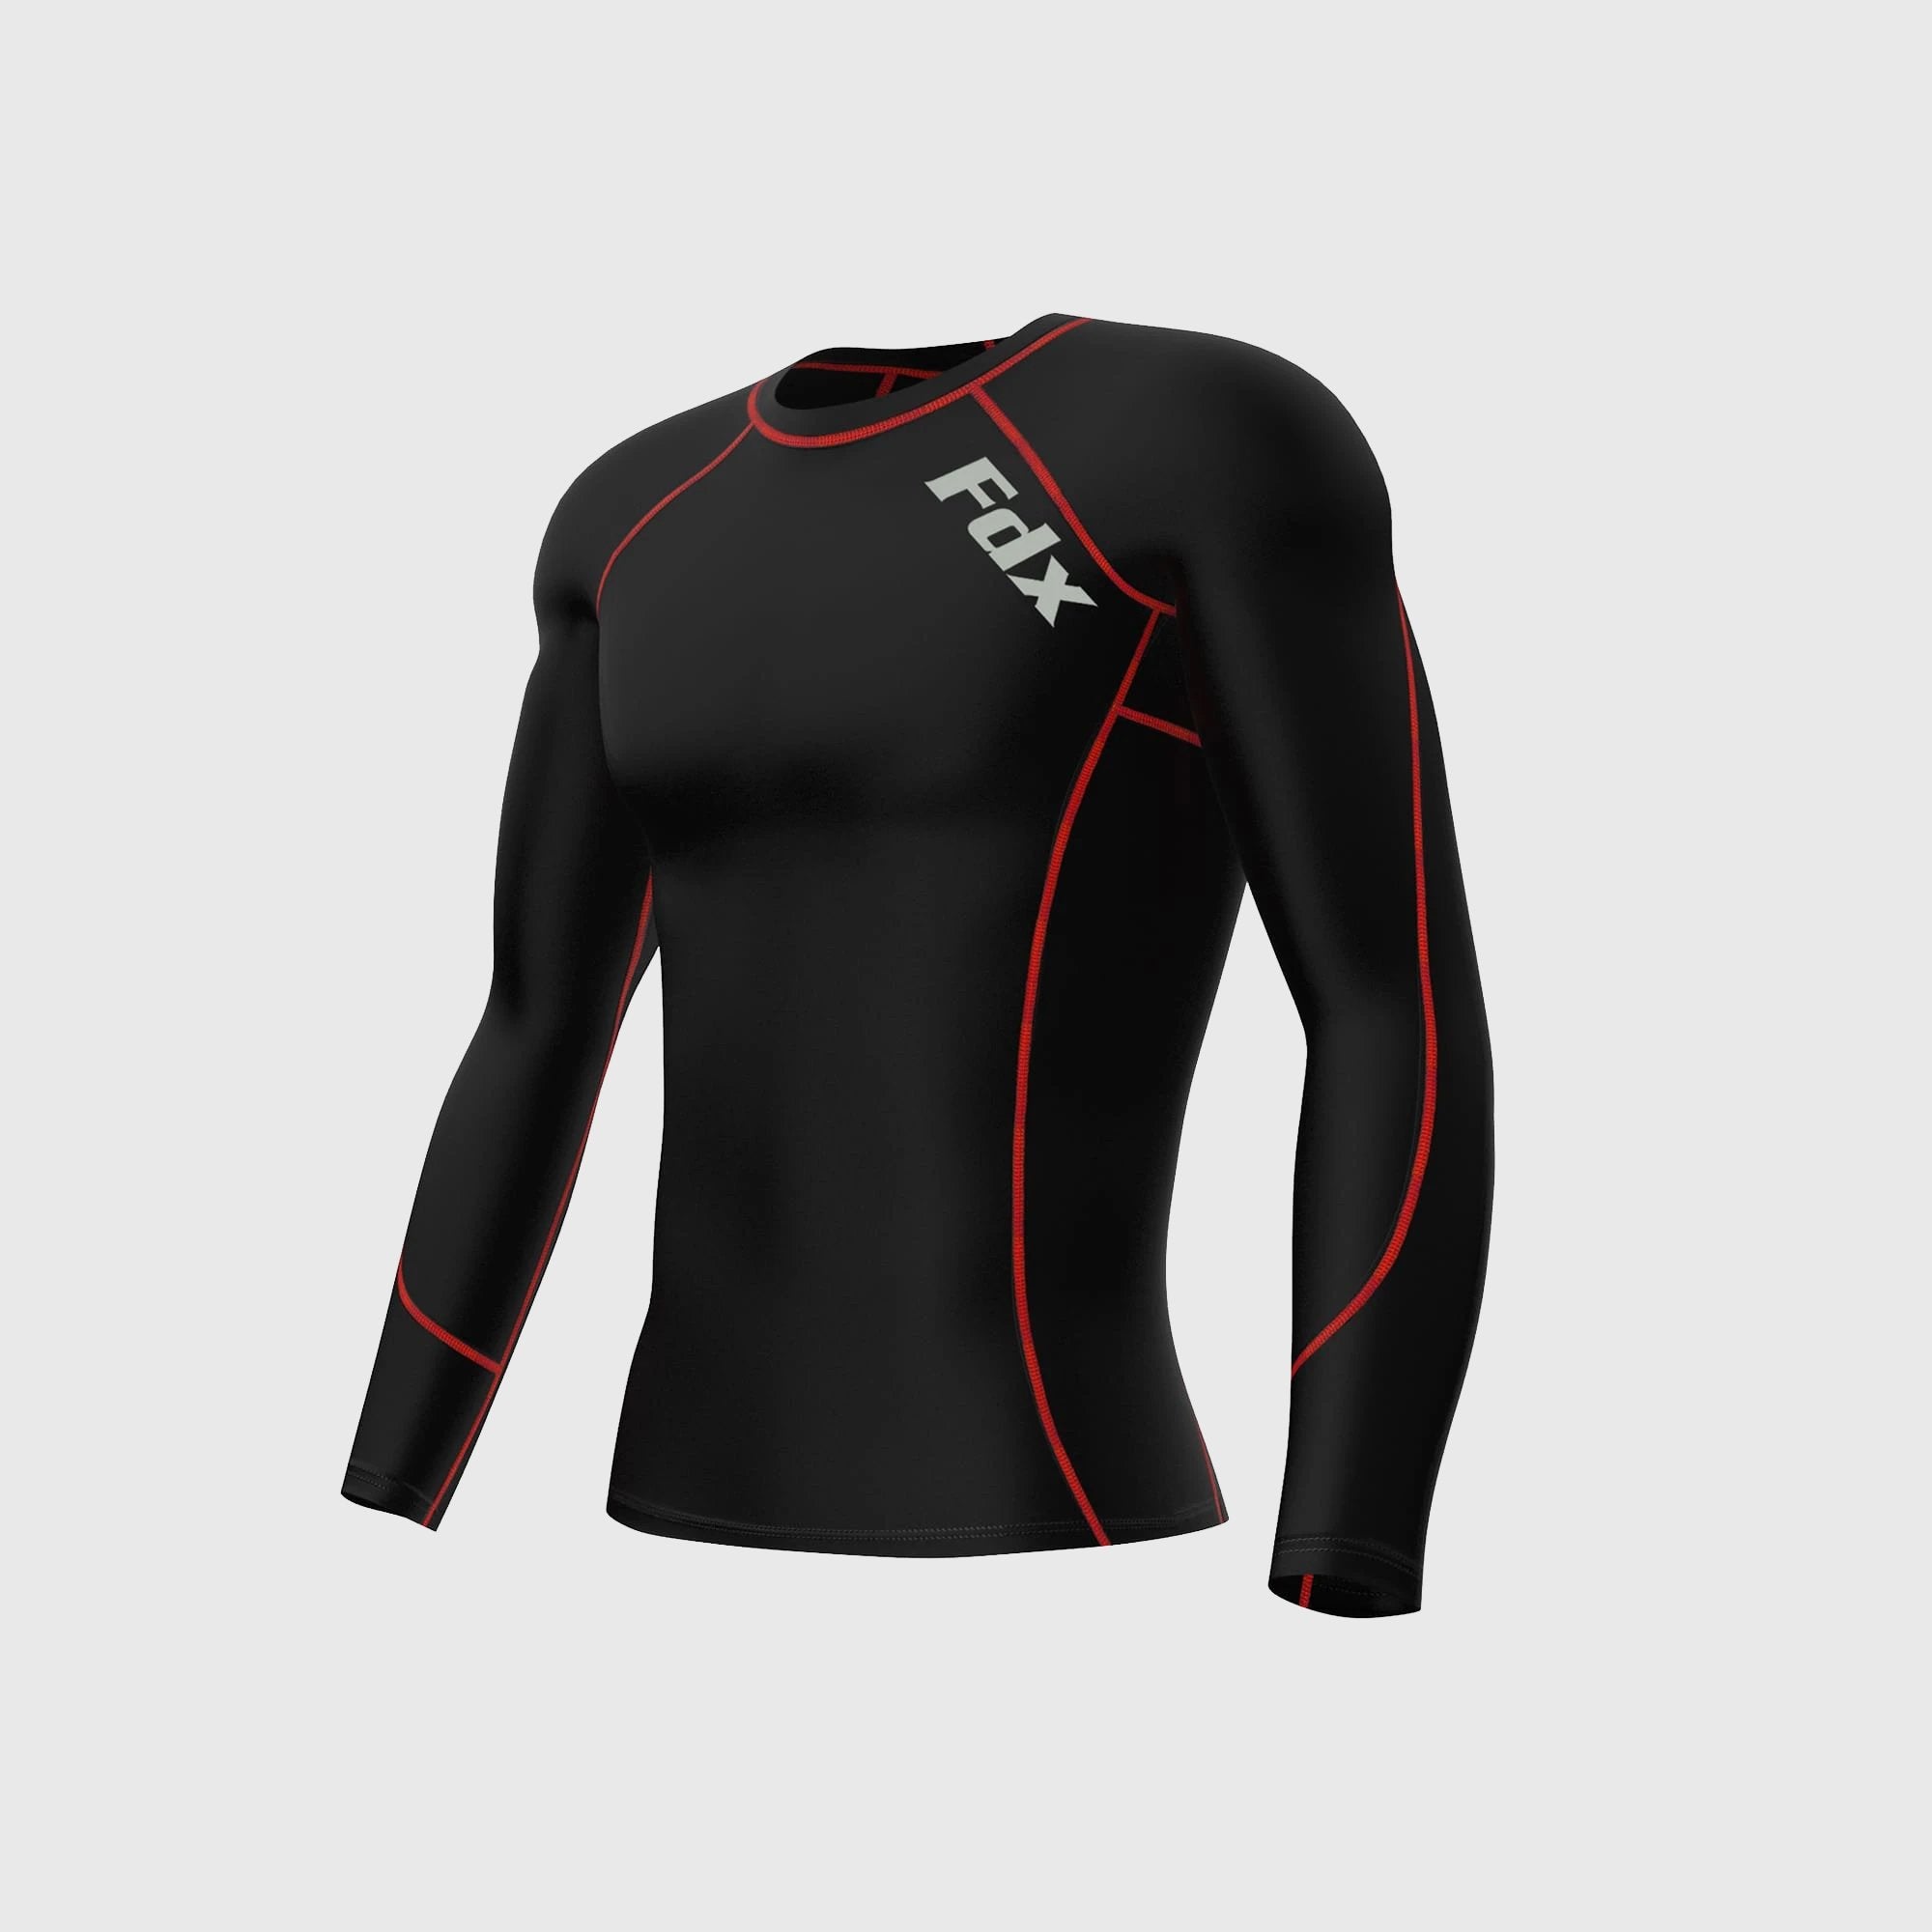 Fdx Men's Black & Red Long Sleeve Compression Top Running Gym Workout Wear Rash Guard Stretchable Breathable - Thermolinx